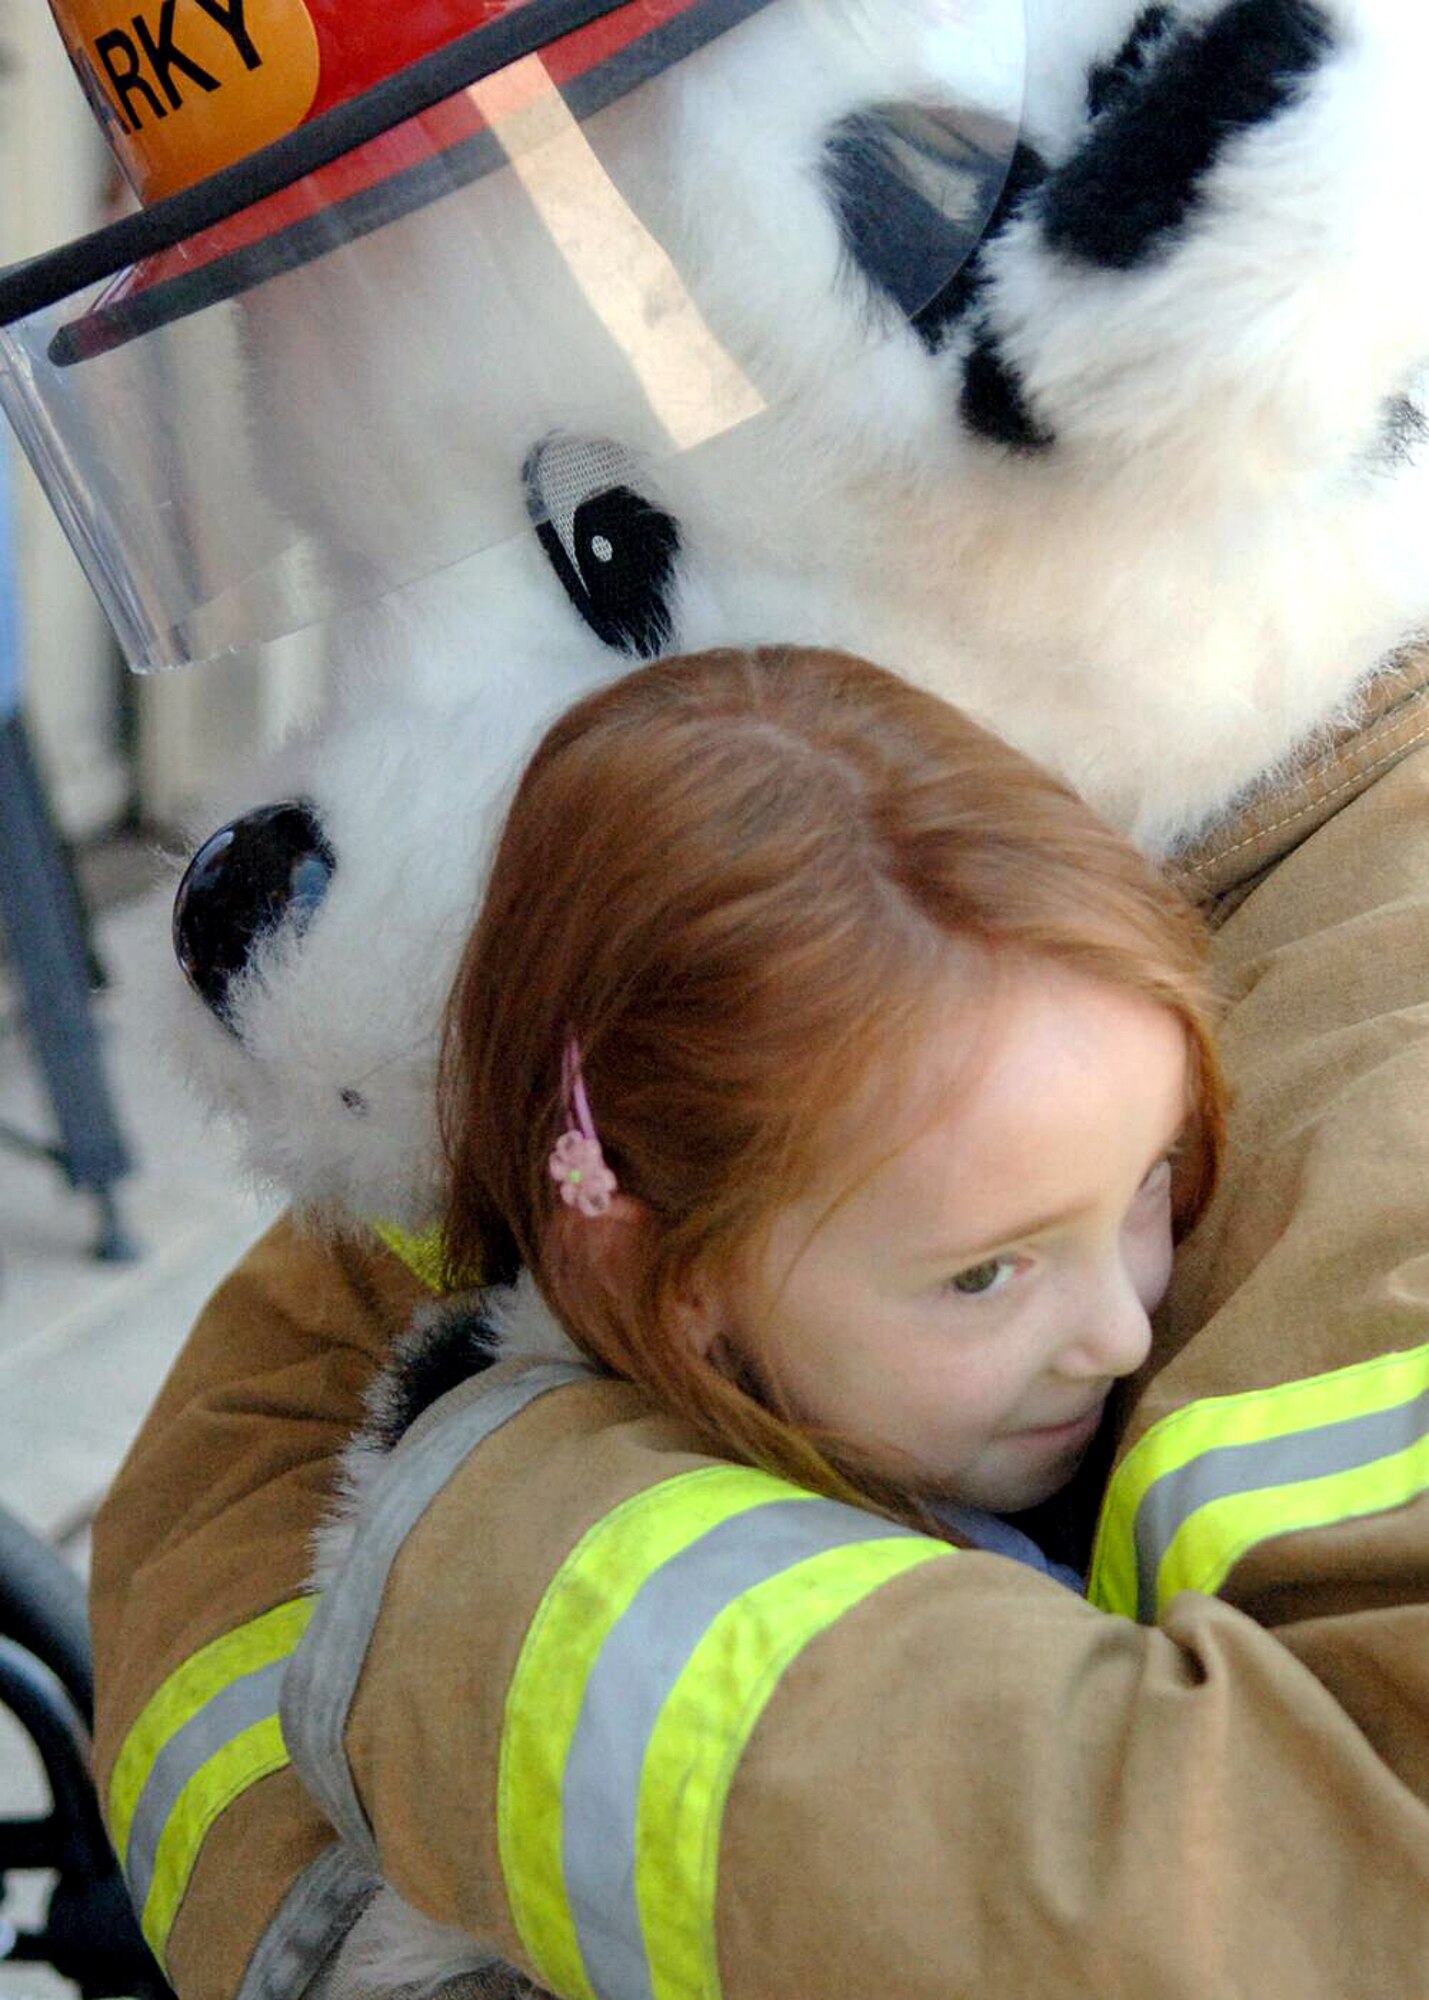 Hannah Mockbee hugs Sparky the fire safety dog during a tour of Davis-Monthan Air Force Base, Ariz., on July 17. The Make-A-Wish Foundation teamed with Davis-Monthan to offer a tour of the base for Hannah and other Make-A-Wish children as well as their families. The tour consisted of demonstrations by an explosive ordnance disposal robot, base fire department and a weapons load crew for an A-10 Thunderbolt II. Hannah is the daughter of Jeff and Stacie Mockbee. (U.S. Air Force photo/Senior Airman Christina D. Ponte)